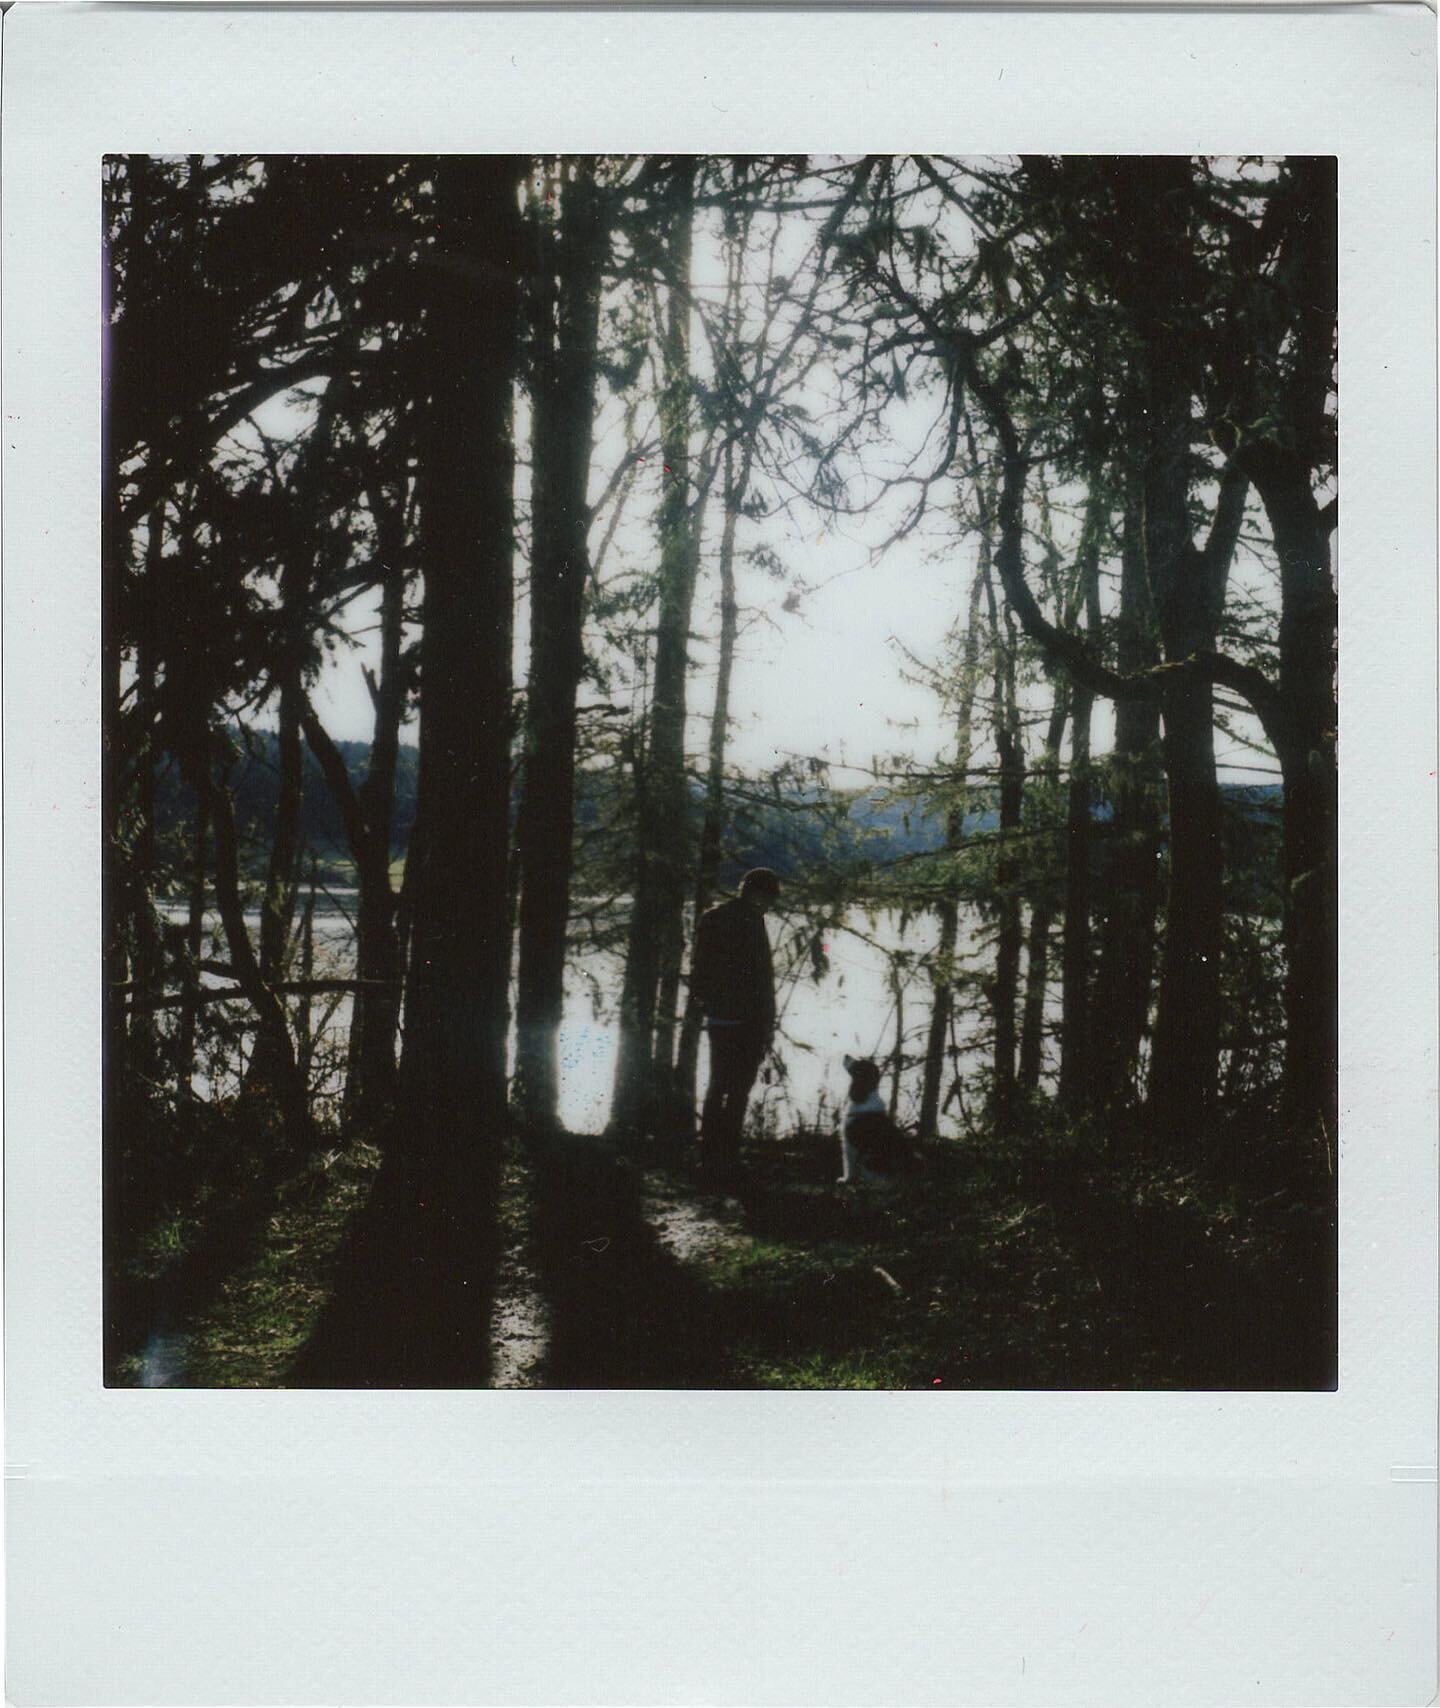 Catching up on some drawing and felting projects, but in the meantime: here are some more recent #Instax, from last week&rsquo;s visit to #HaggLake.
&bull;
#LomoSquare @lomography #Lomography #FujiInstax #Instax #InstaxSquare #pnwonderland